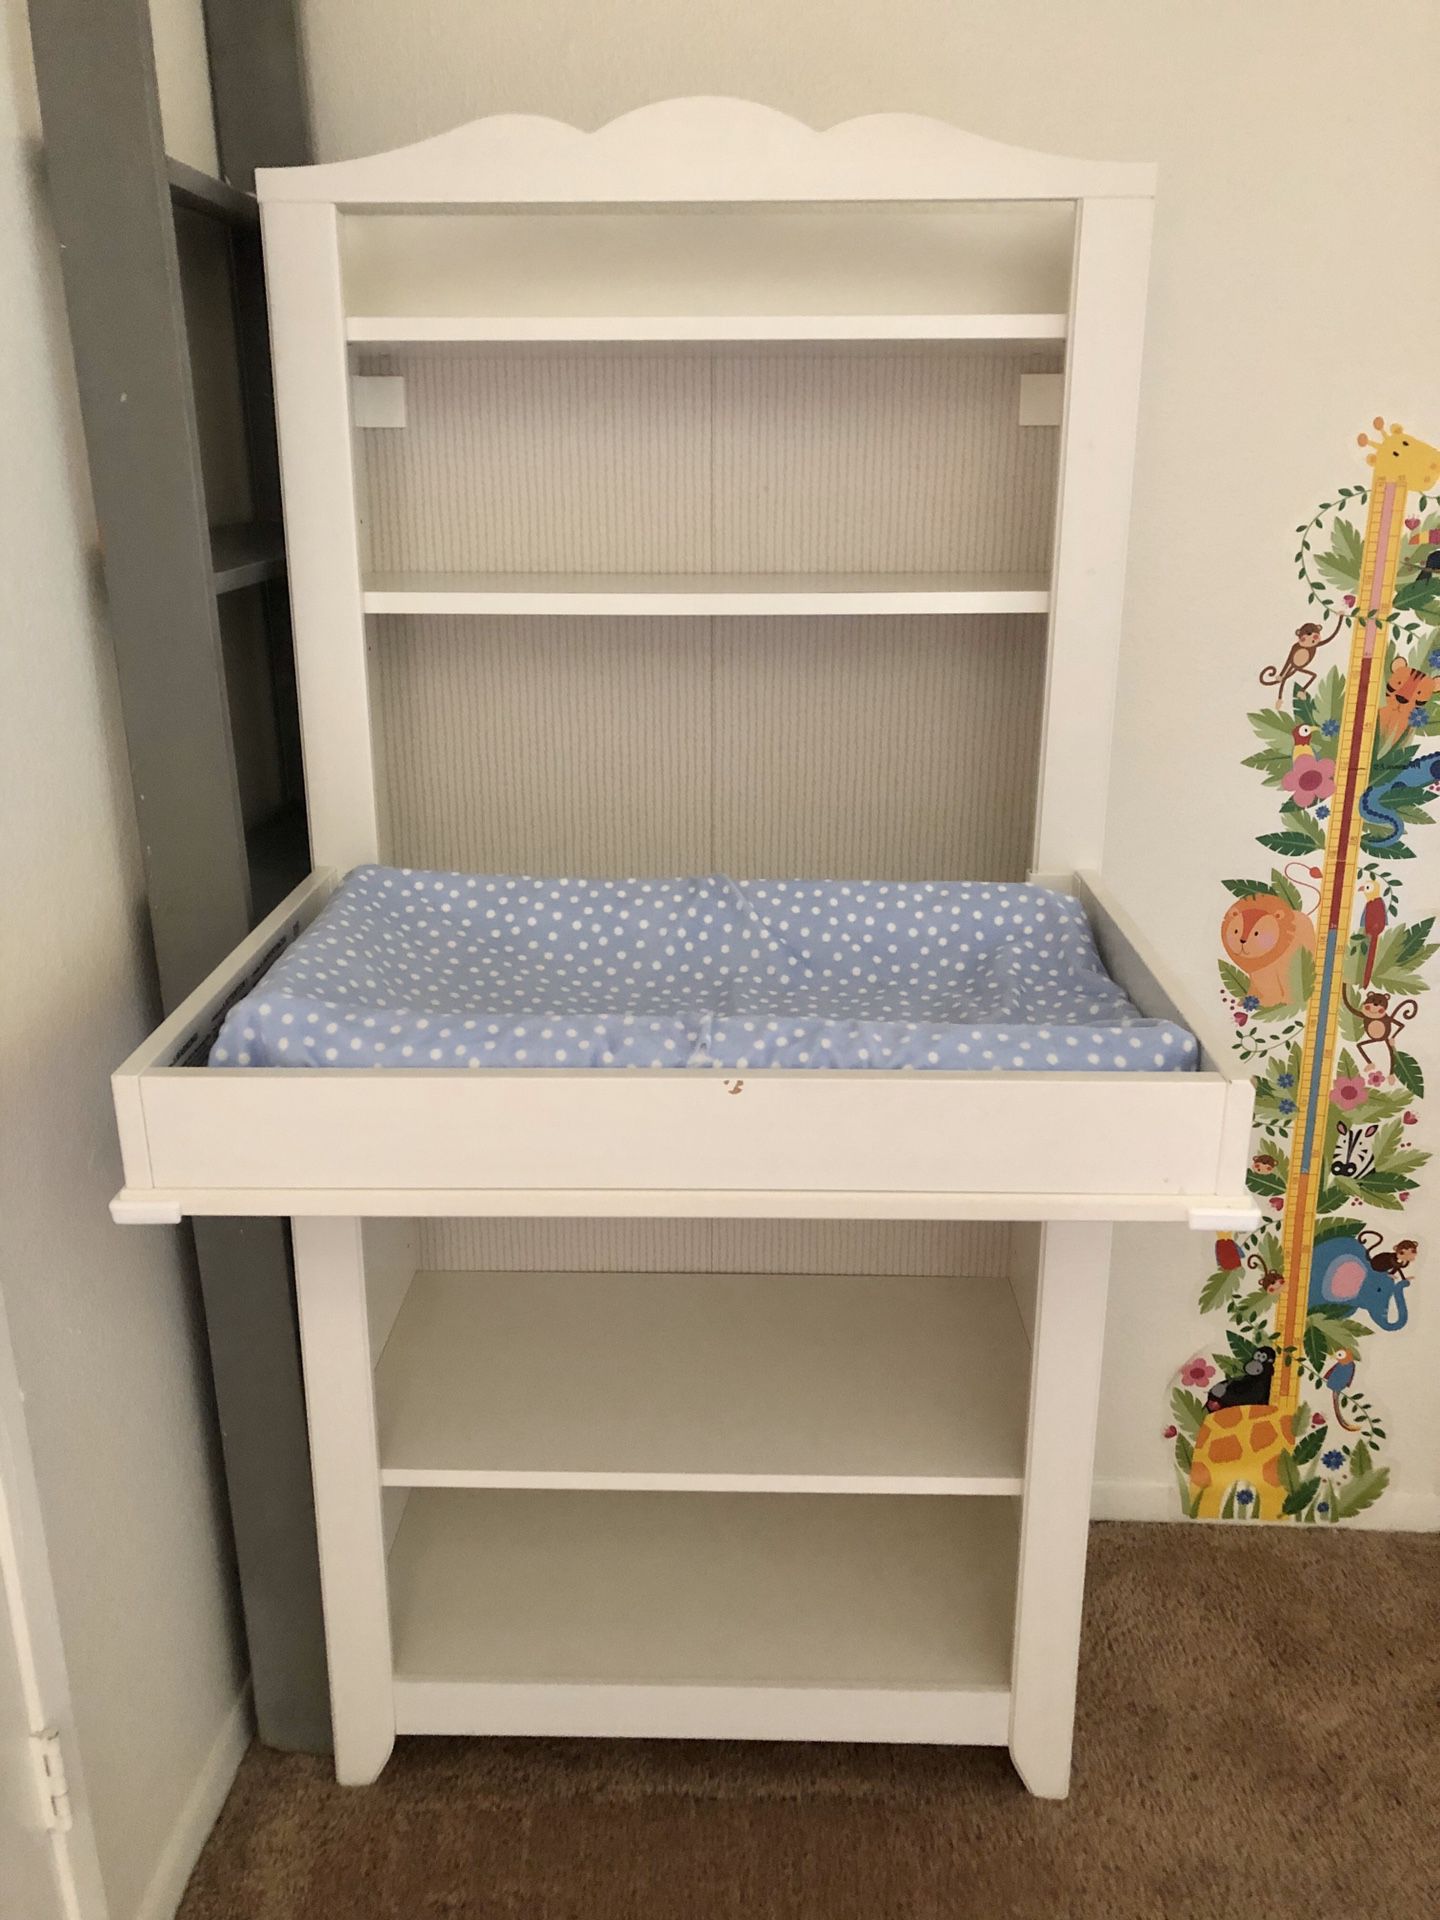 Changing table (removable) + shelf